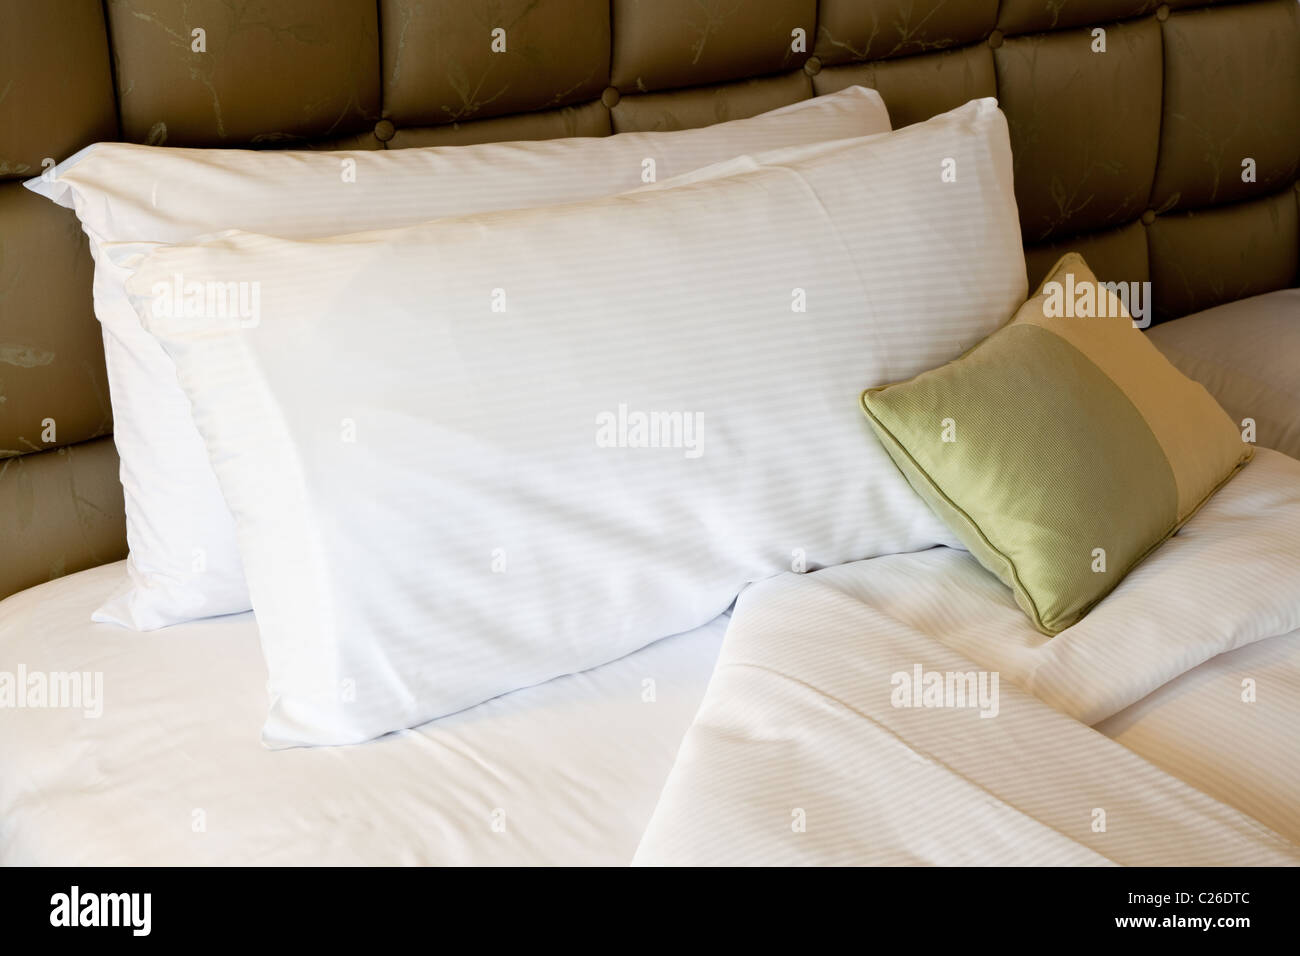 Comfortable bed with pillows and quilt cover Stock Photo